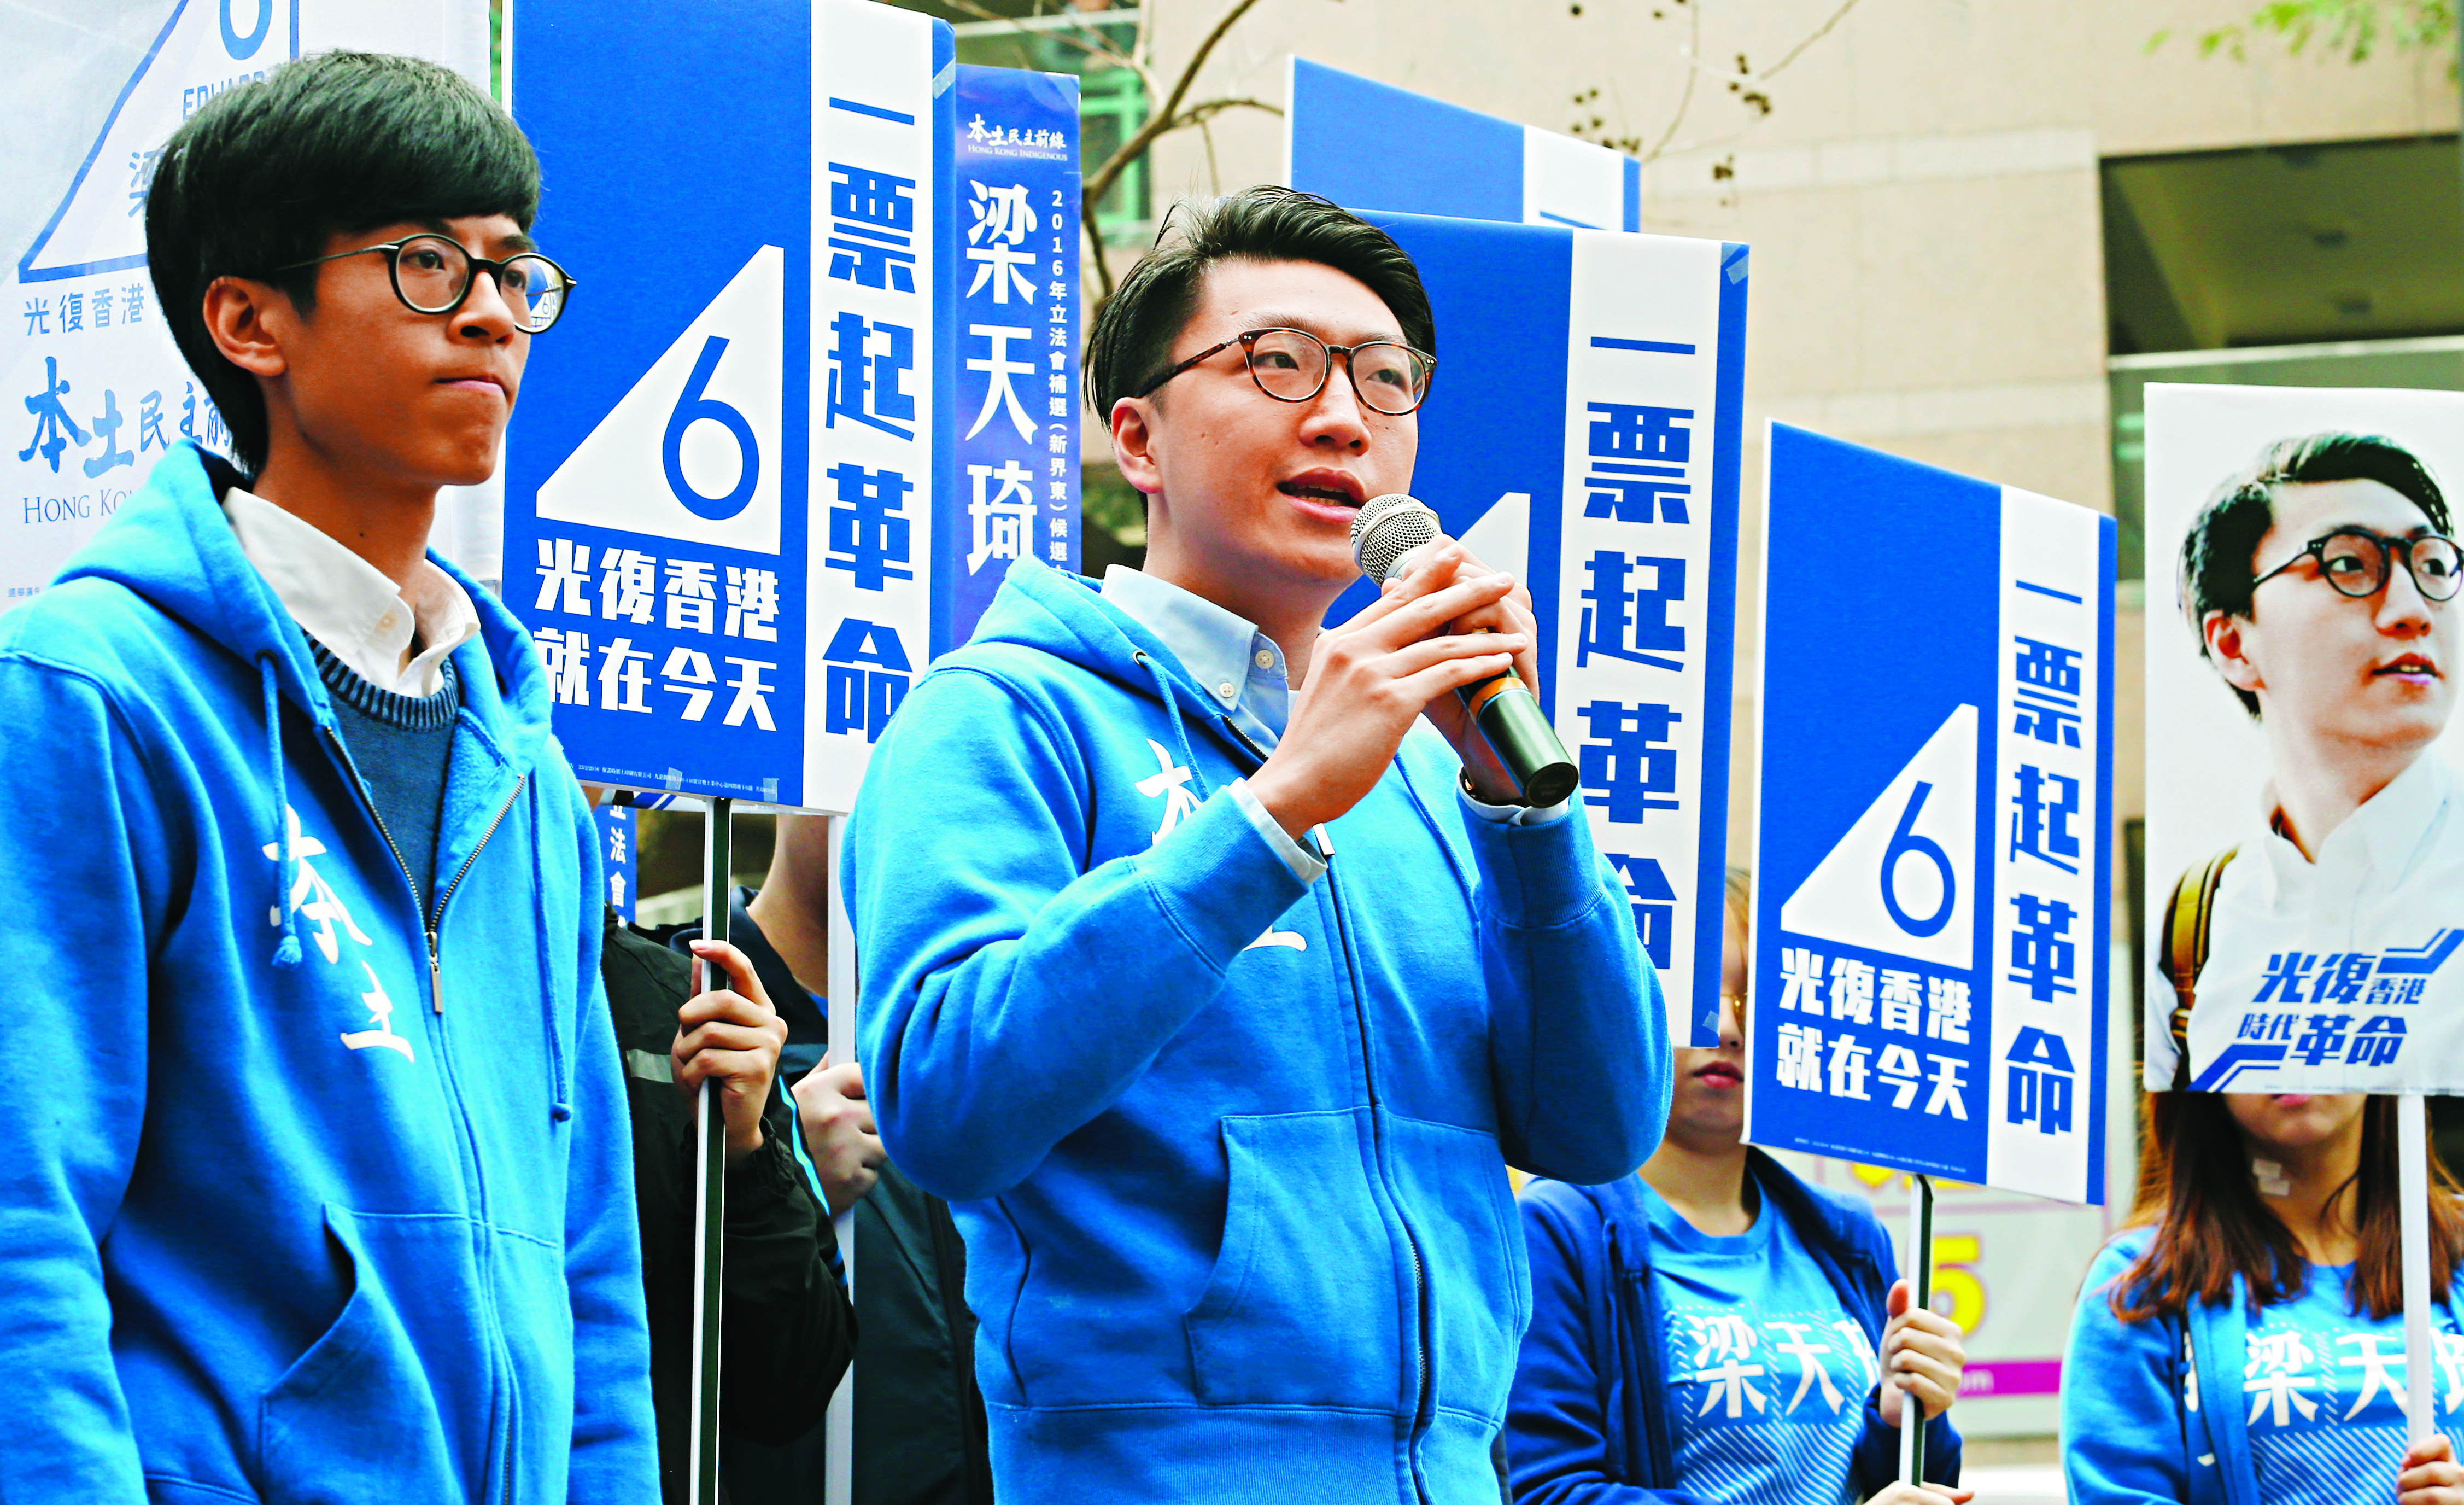 New Territories East by-election candidate Edward Leung (right) at a rally in Sheung Shui. Photo: Felix Wong